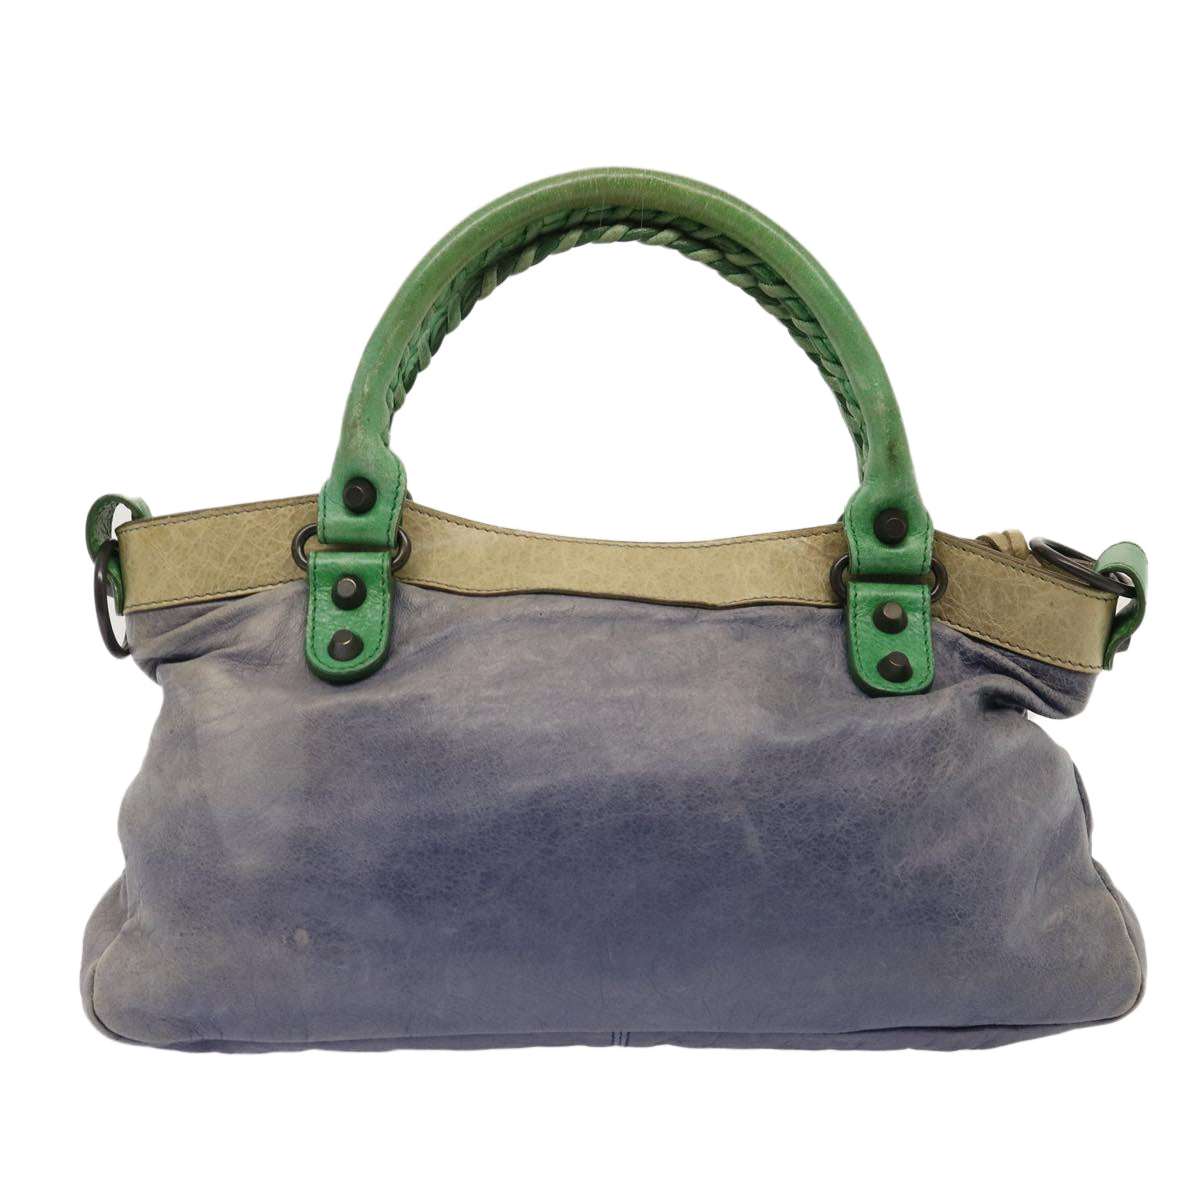 BALENCIAGA The First Hand Bag Leather 2way Purple Green 103208 Auth 73254 - 0